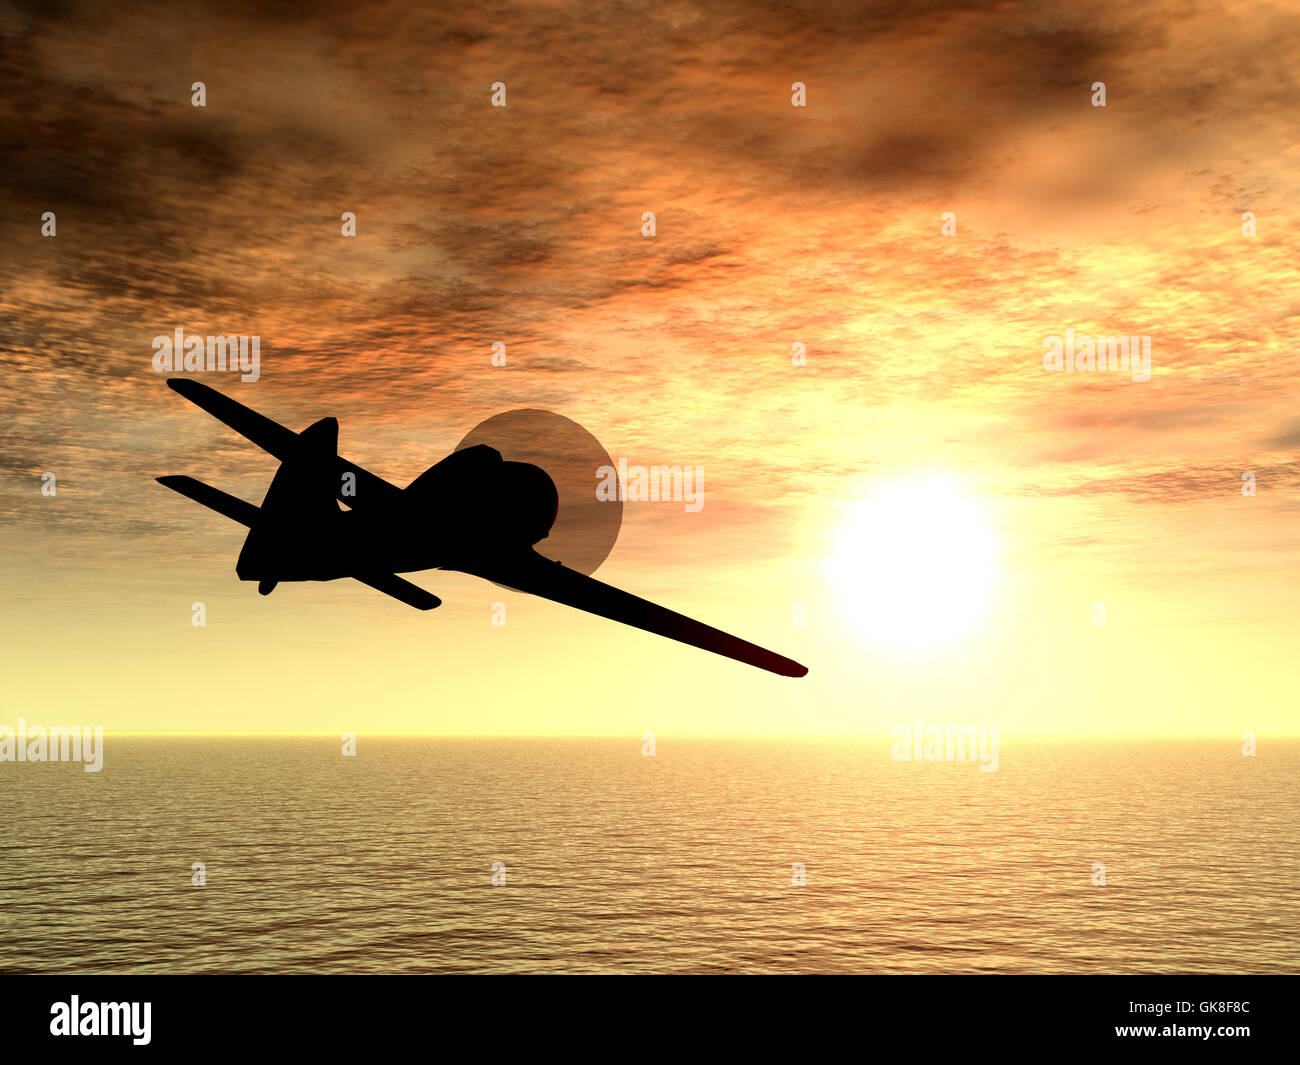 The airplane on a background sunset Stock Photo